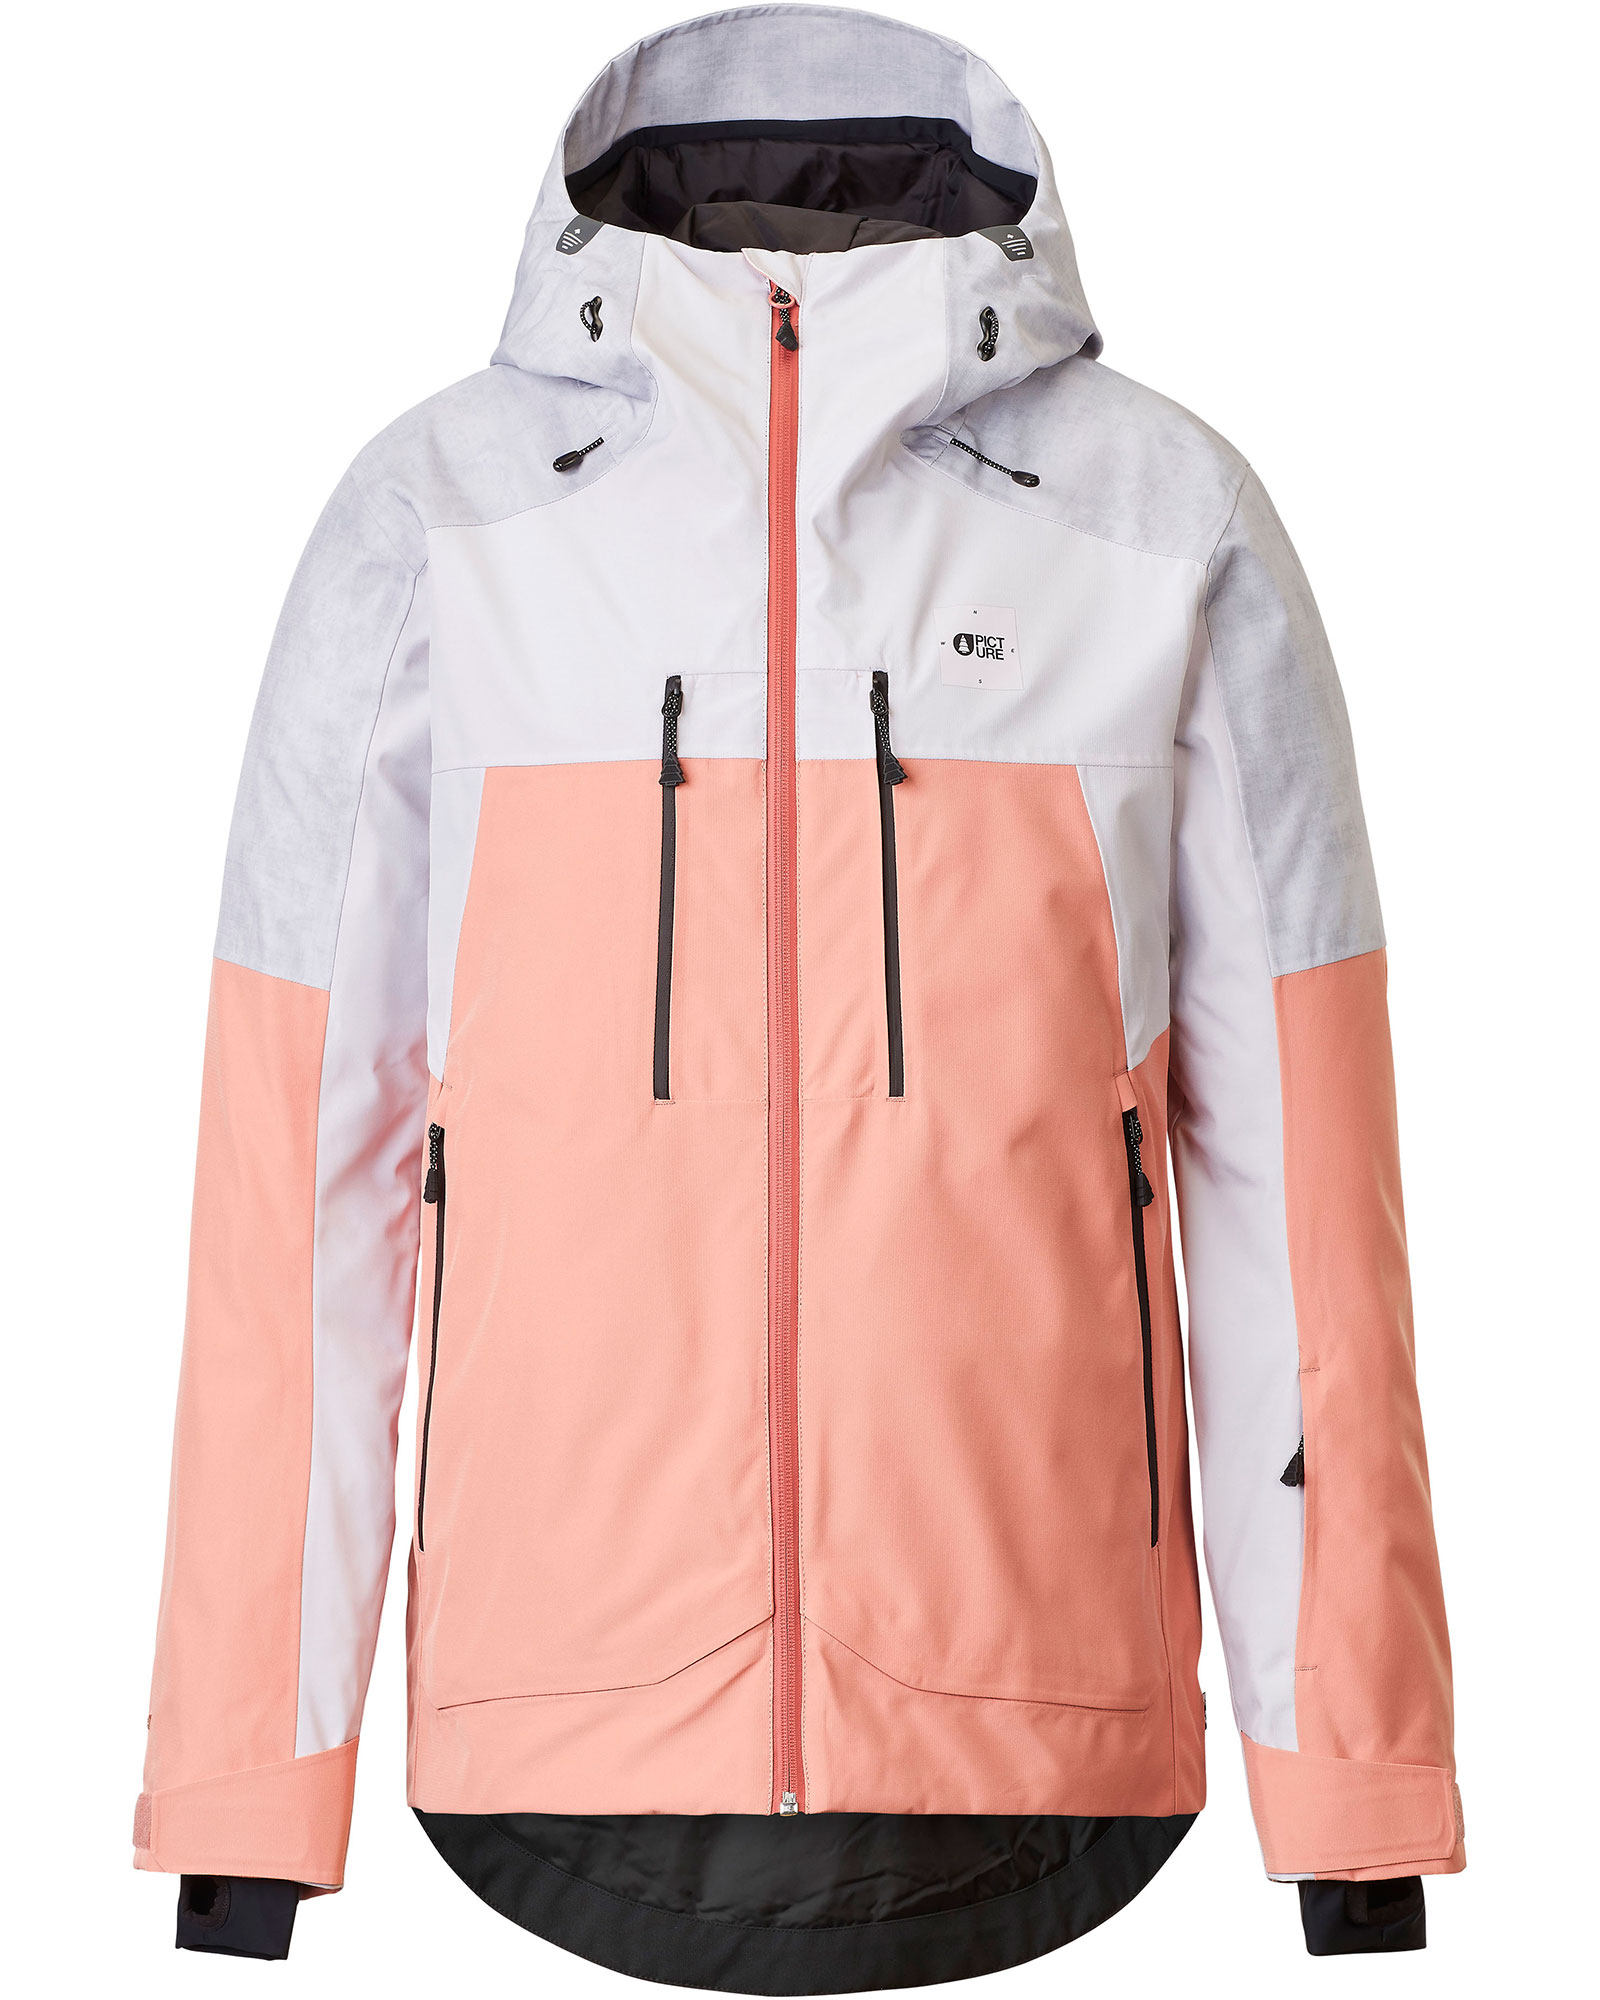 Product image of Picture exa Women's Jacket